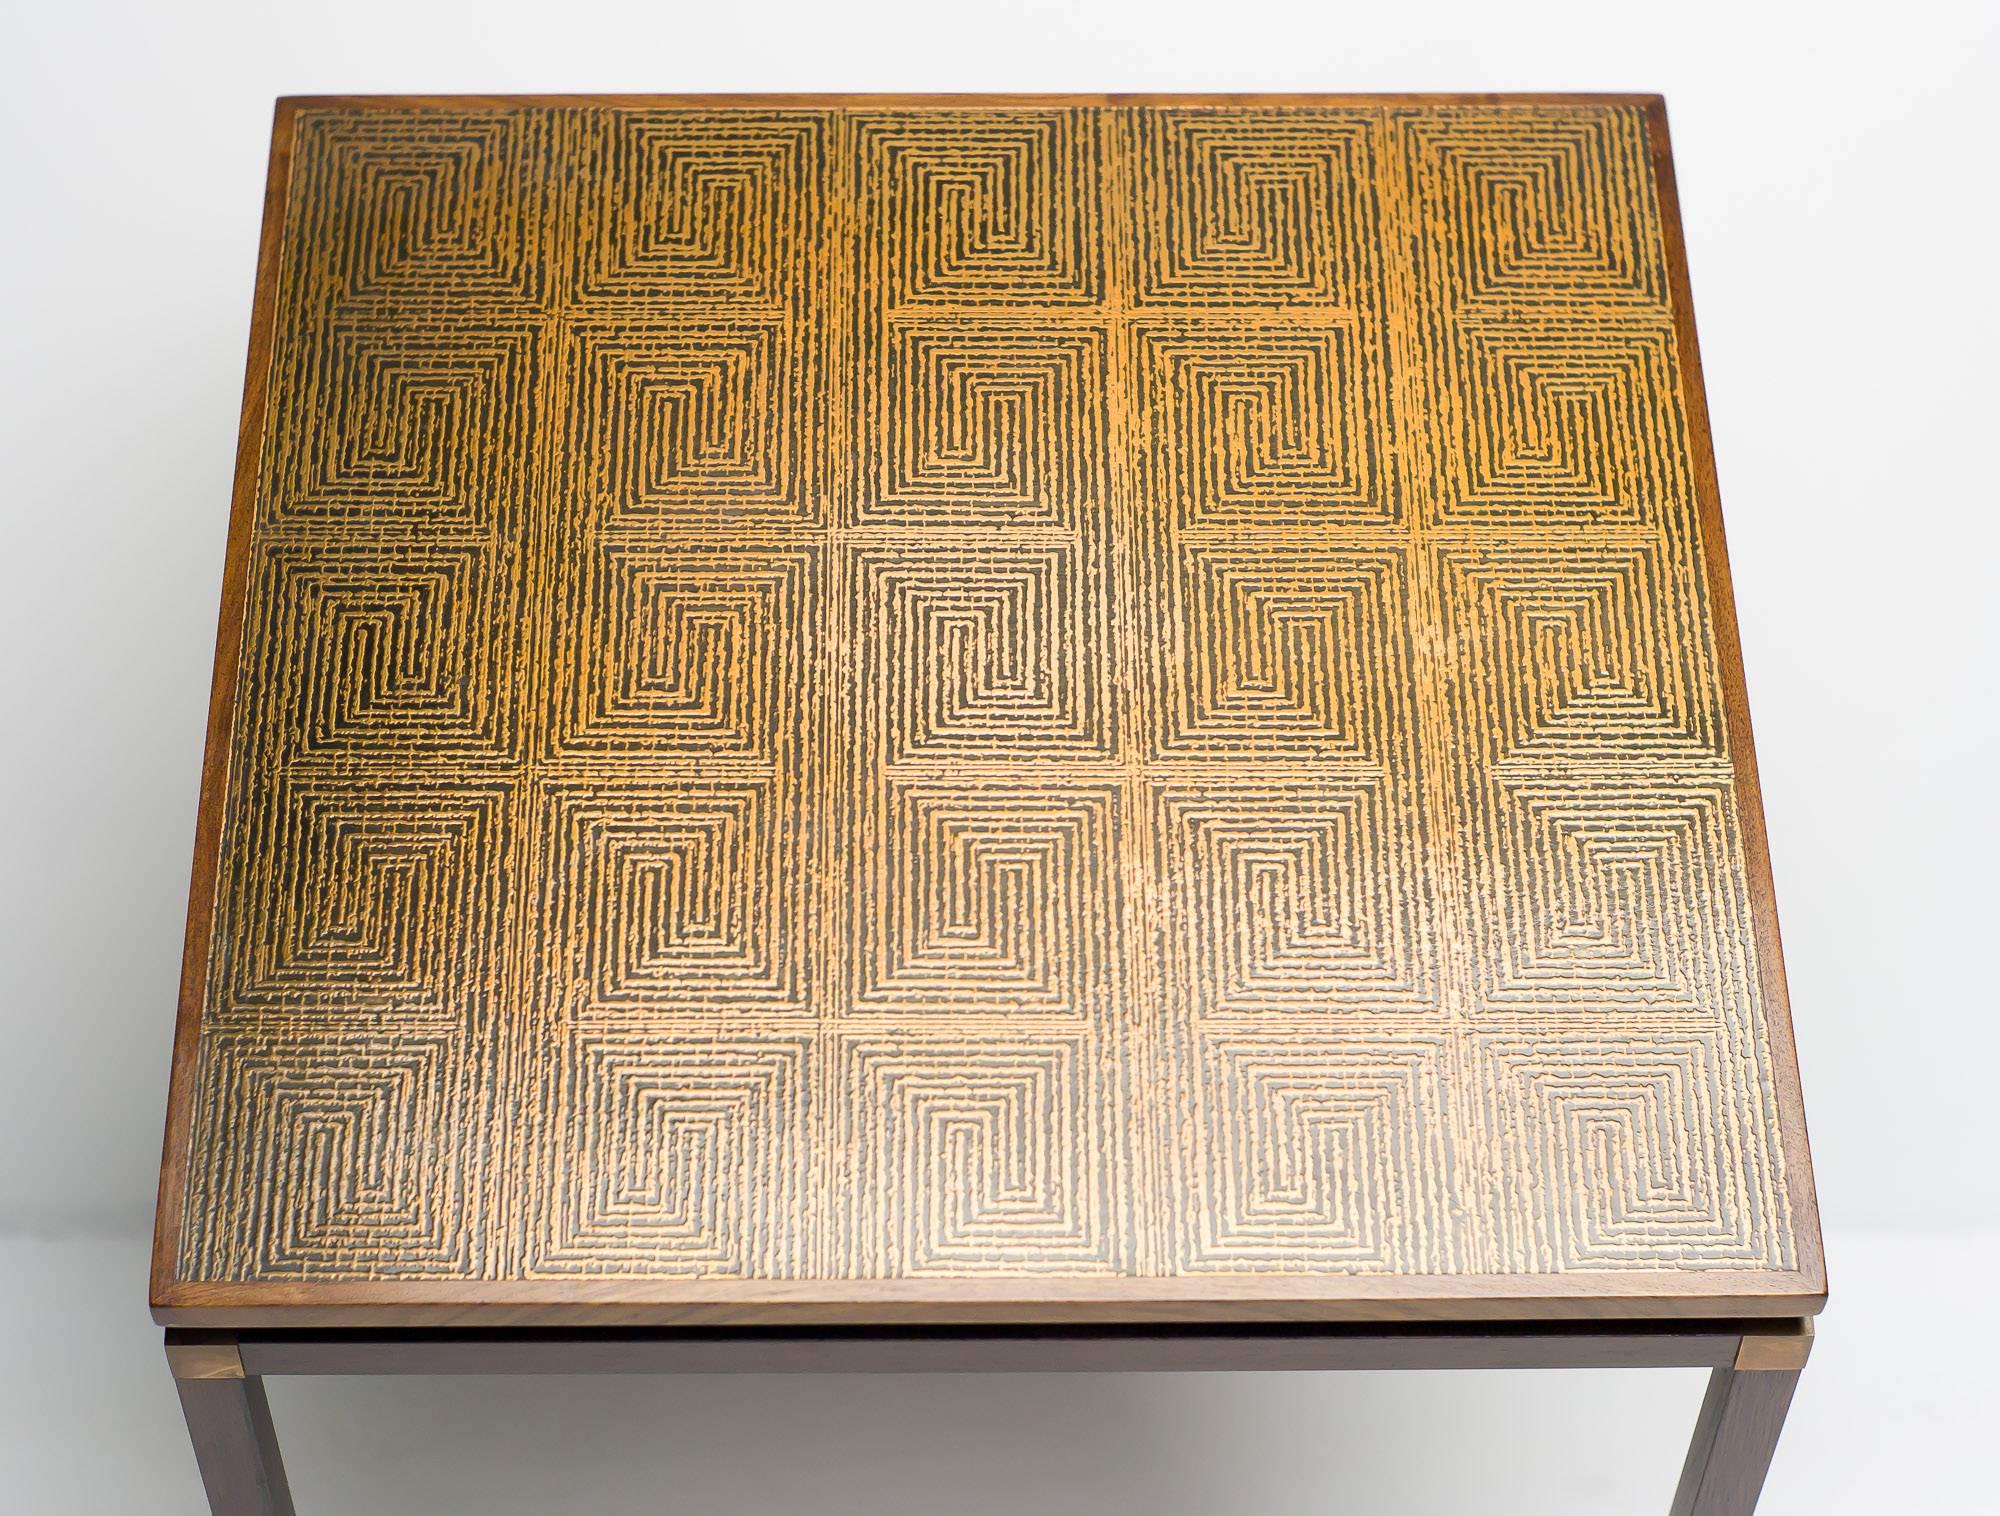 Set of two side tables, Denmark, circa 1960.
Embossed copper plate with abstract decoration.
Rosewood frame with brass joints.  

Excellent fast and affordable worldwide shipping available.